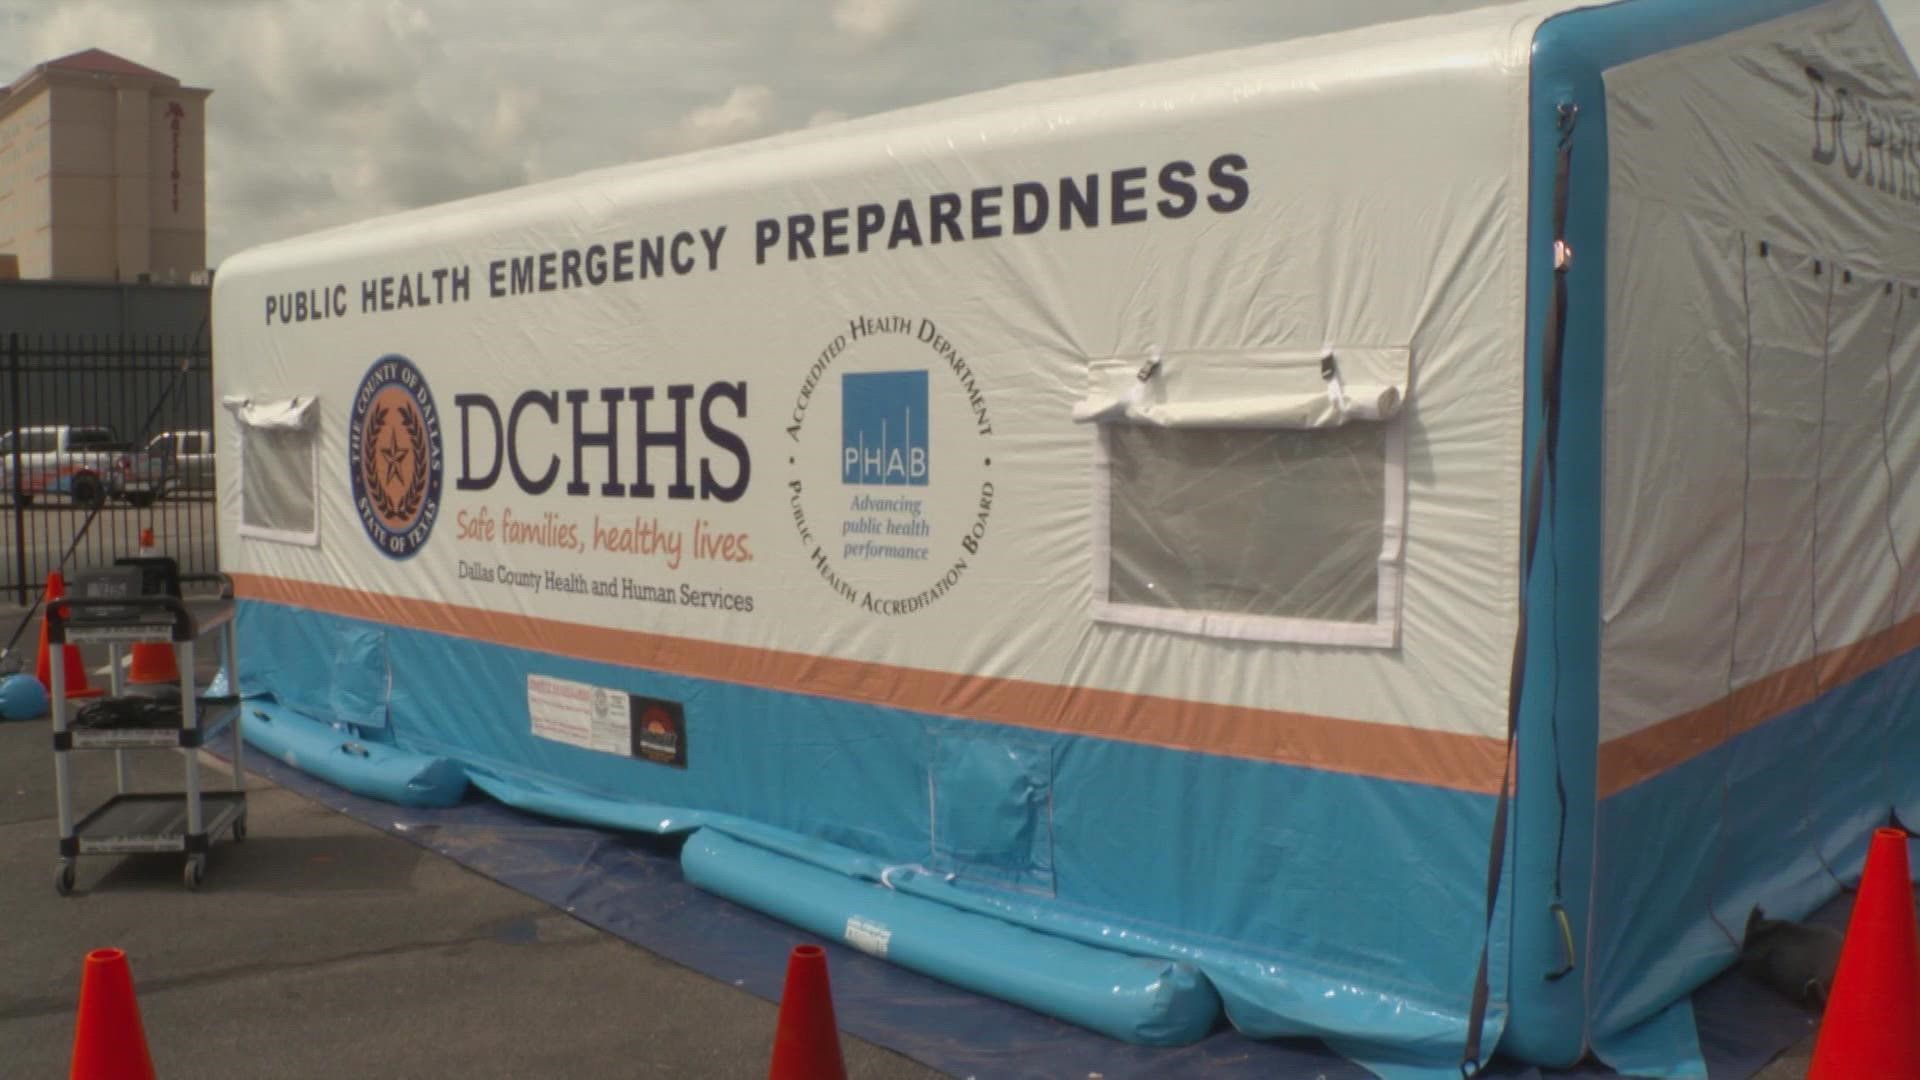 Similar to the COVID-19 response, Dallas County set up a drive-thru vaccination site.